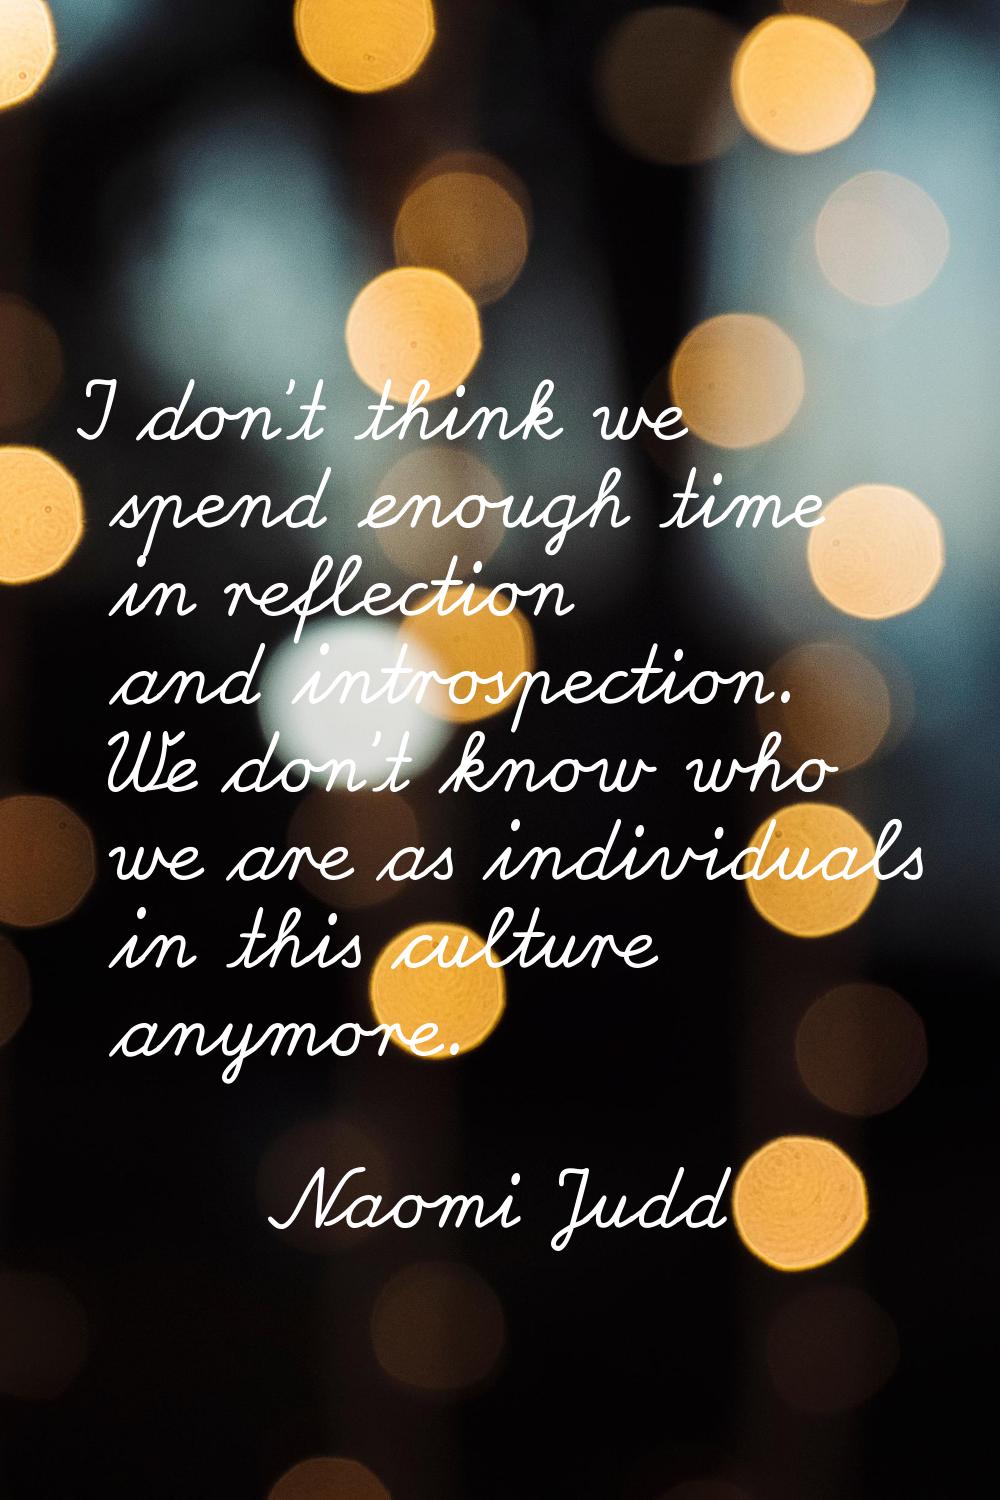 I don't think we spend enough time in reflection and introspection. We don't know who we are as ind